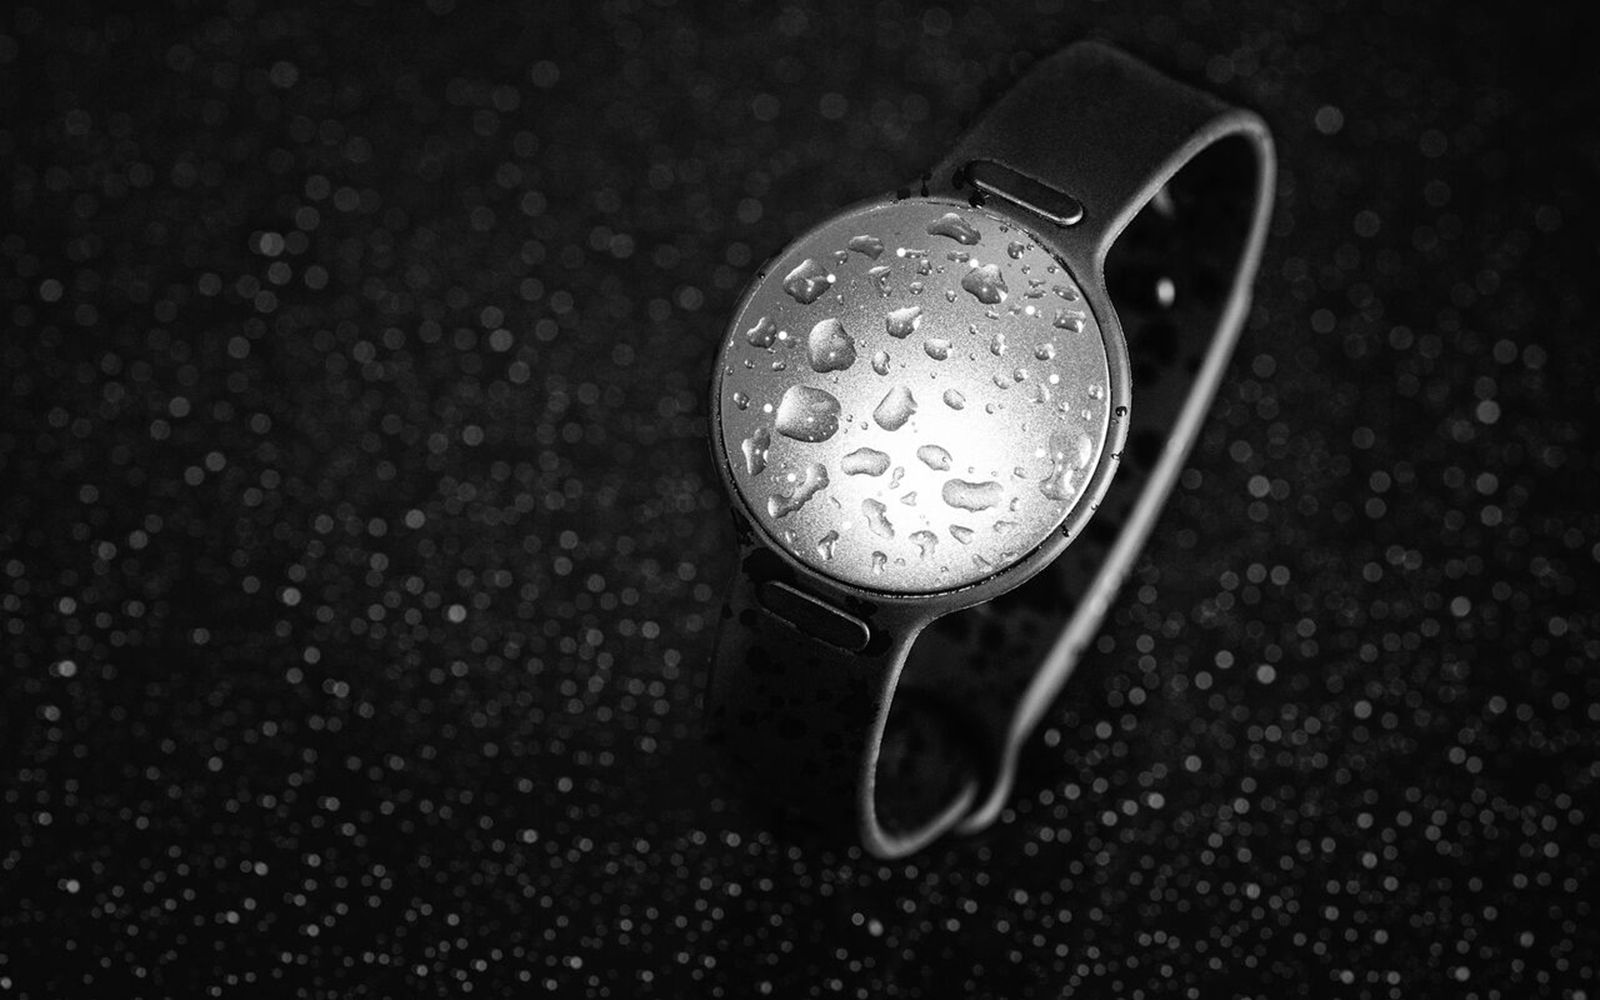 misfit shine 2 gets speedo swim tracker upgrade but you’ll have to pay image 1